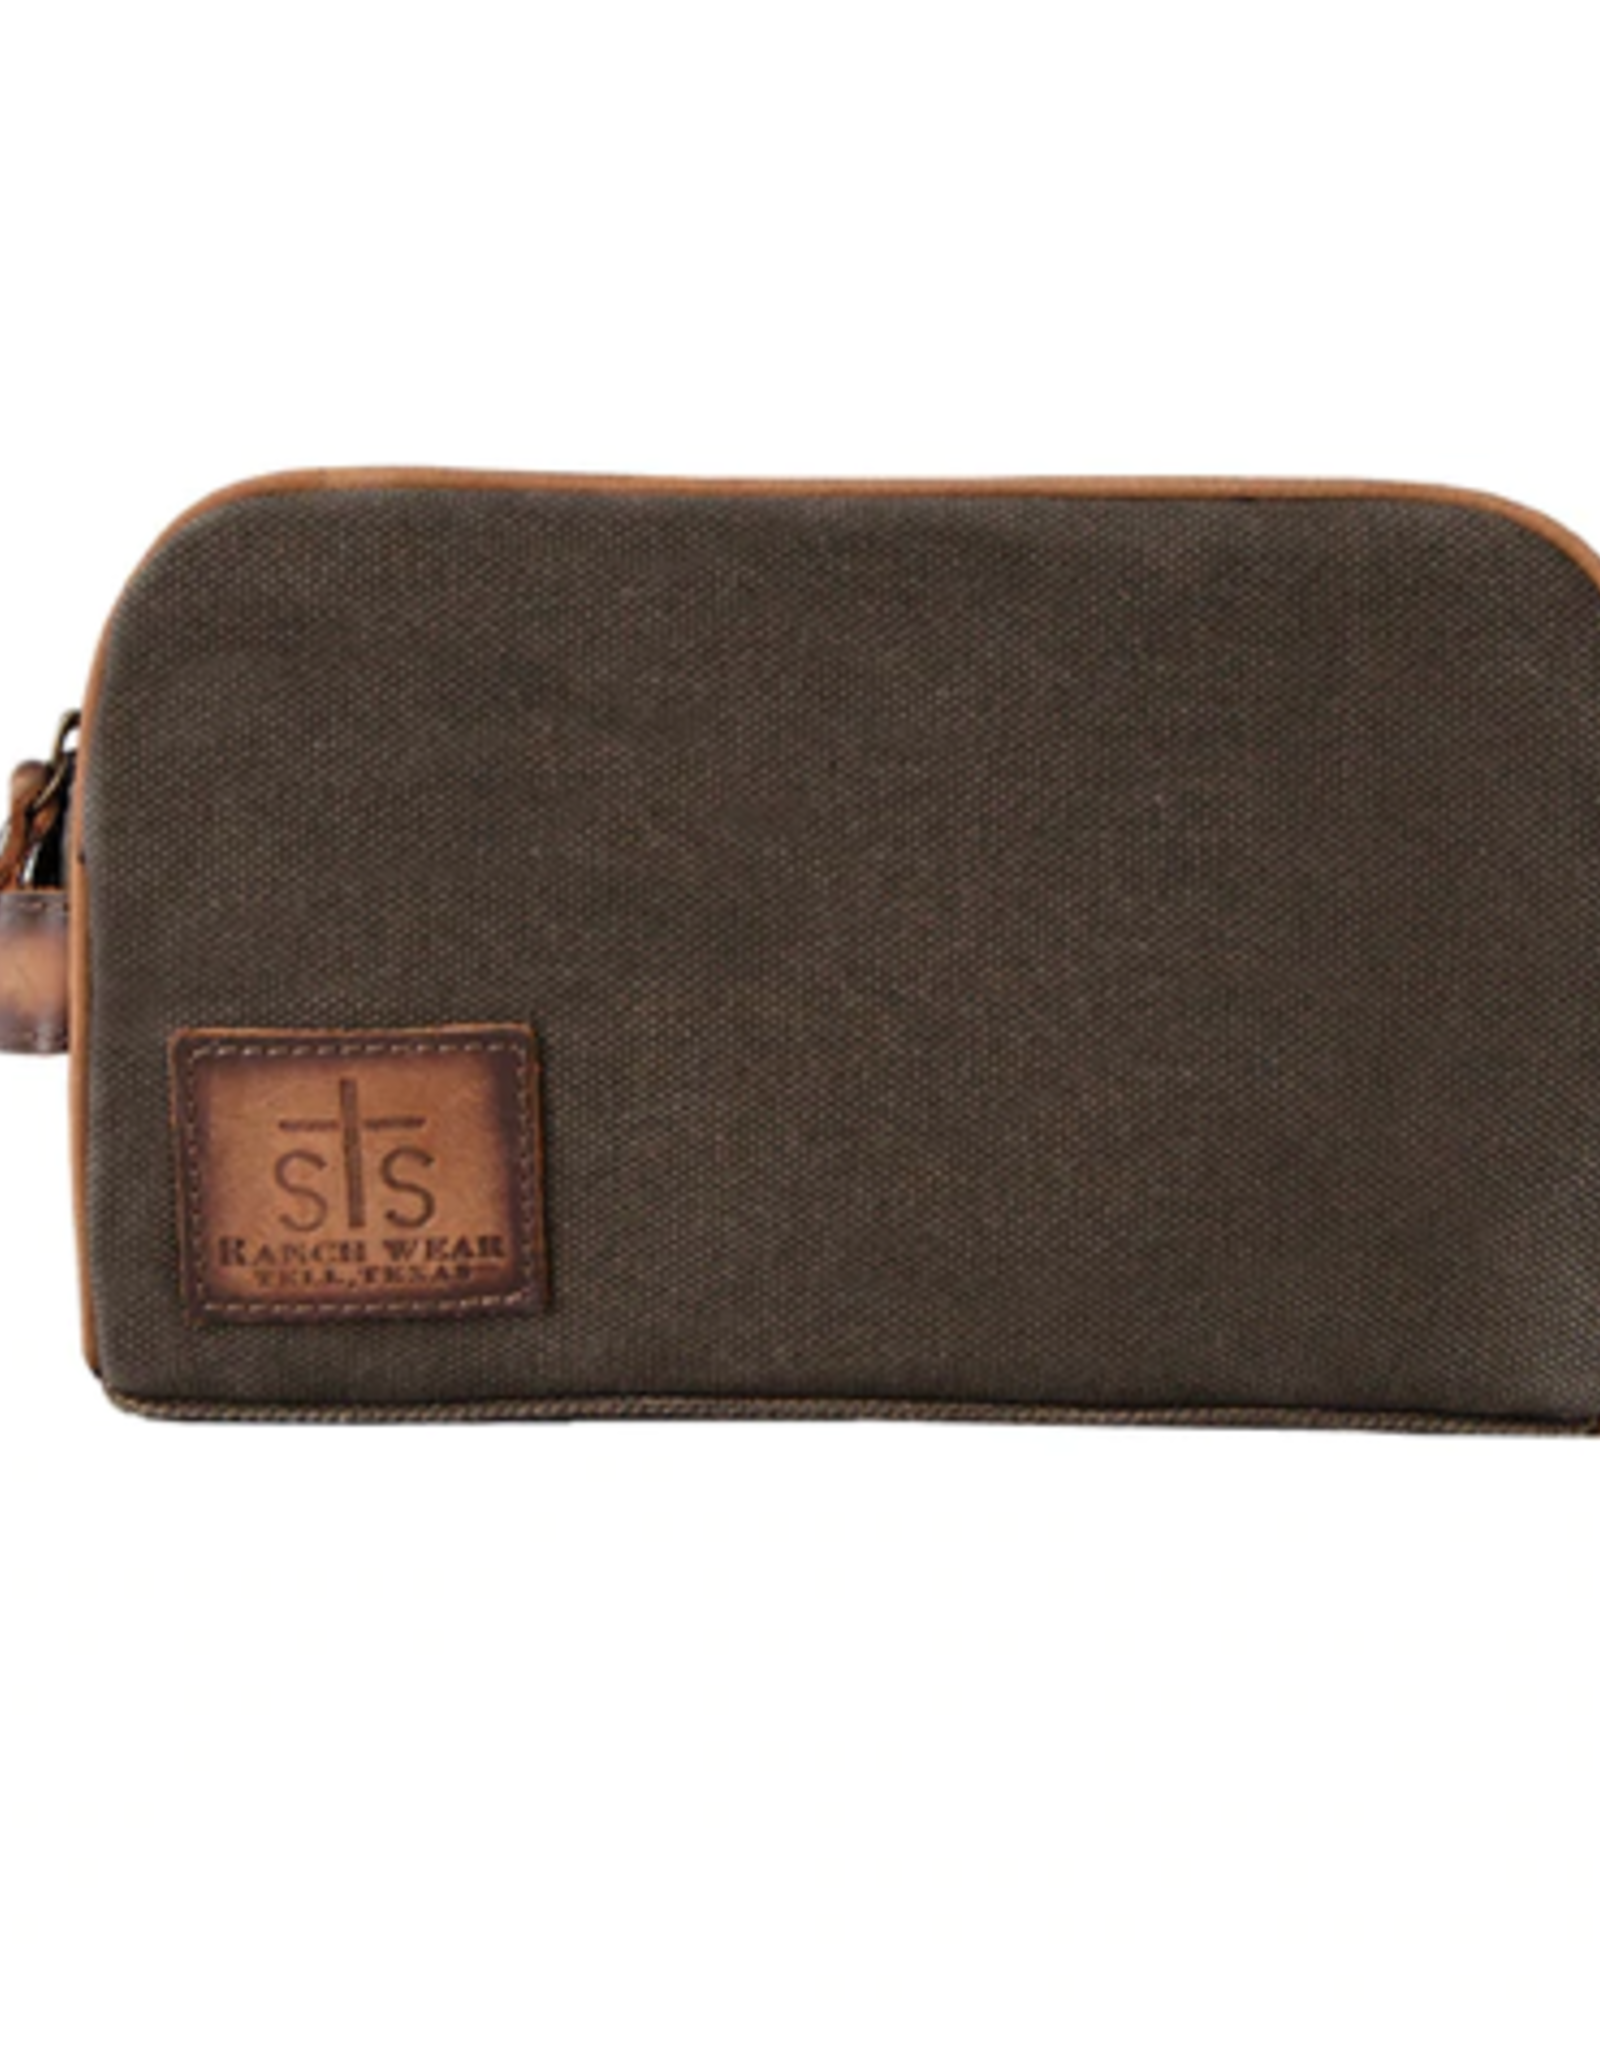 STS TOILETRIE BAG STS DARK CANVAS